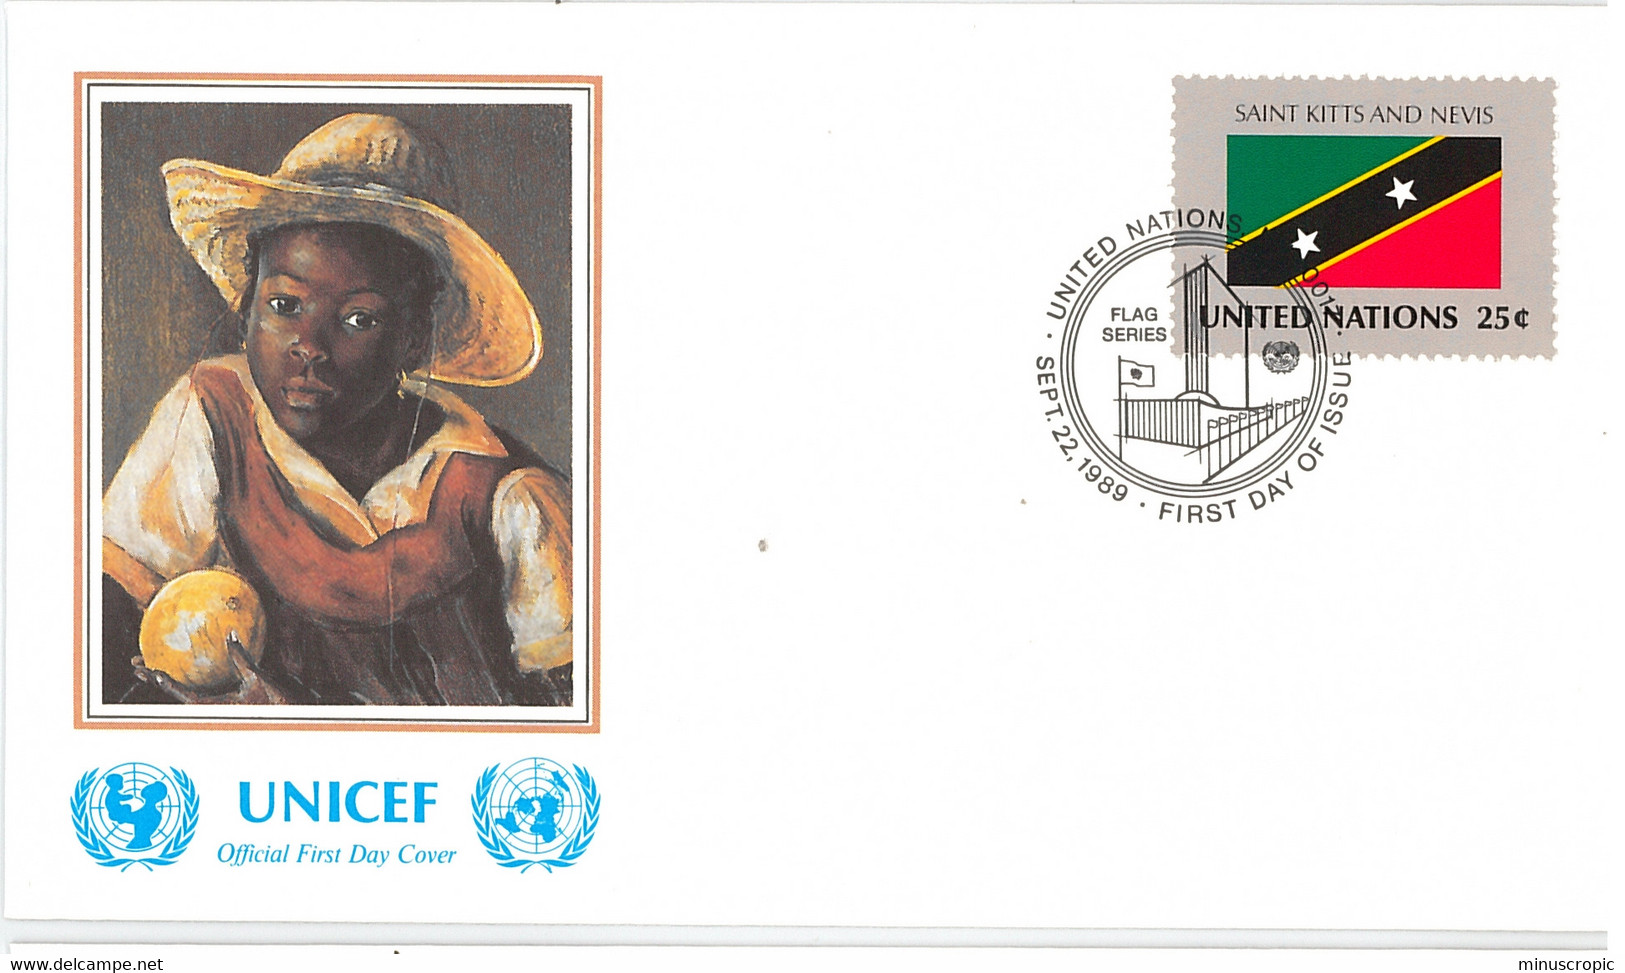 Enveloppe FDC United Nations - UNICEF - Flag Series 13/89 - Saint Kitts And Nevis - 1989 - Covers & Documents